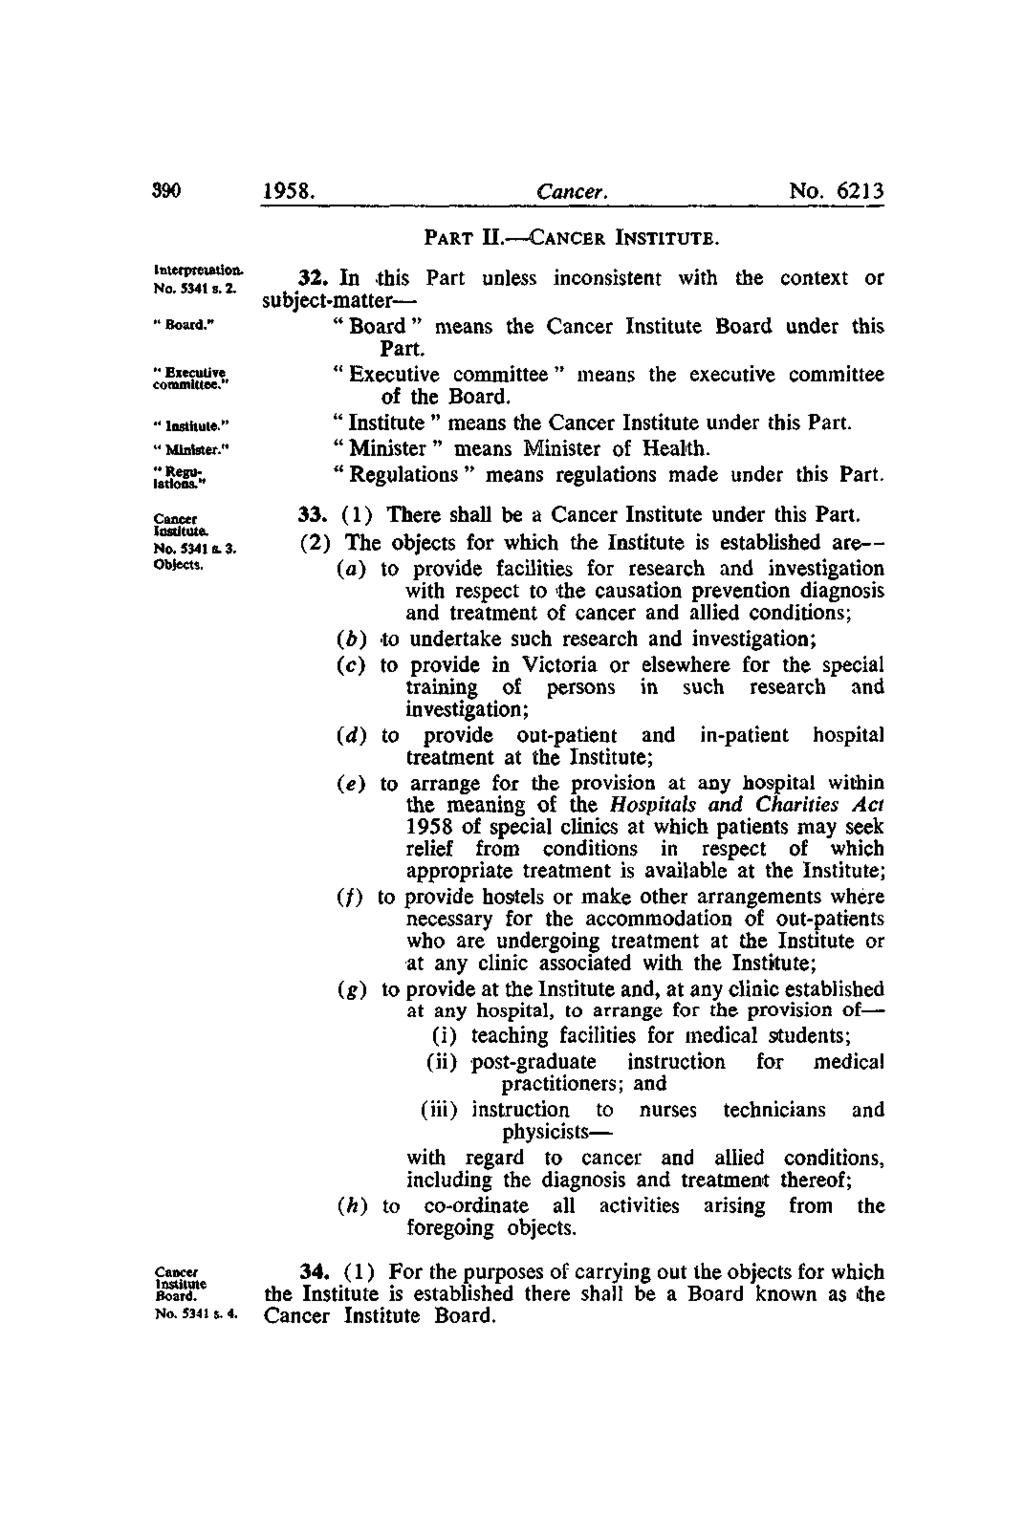 390 1958. Cancer. No. 6213 PART II. CANCER INSTITUTE. Interpretation. No. 5341 s. 2. " Board." " Executive committee." " Institute." " Minister." " Regulations." Cancer Institute. No. 5341 8.3. Objects.